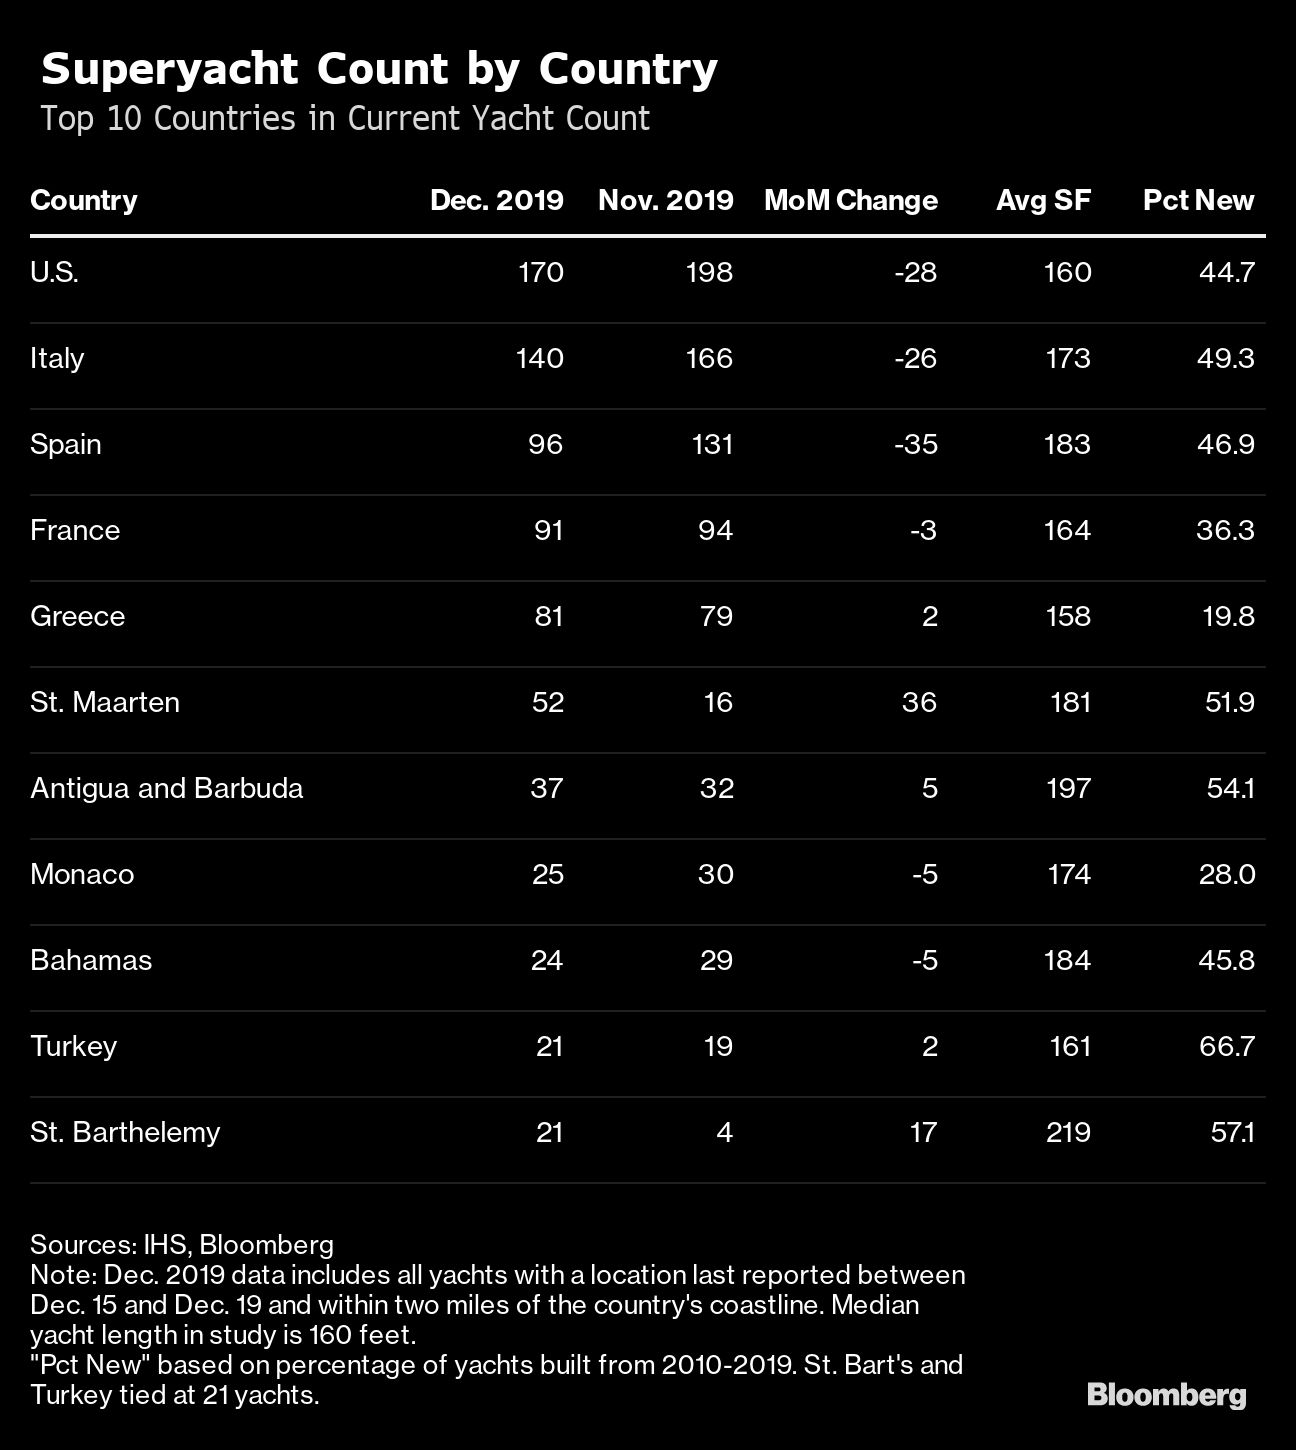 superyacht tables by bloomberg